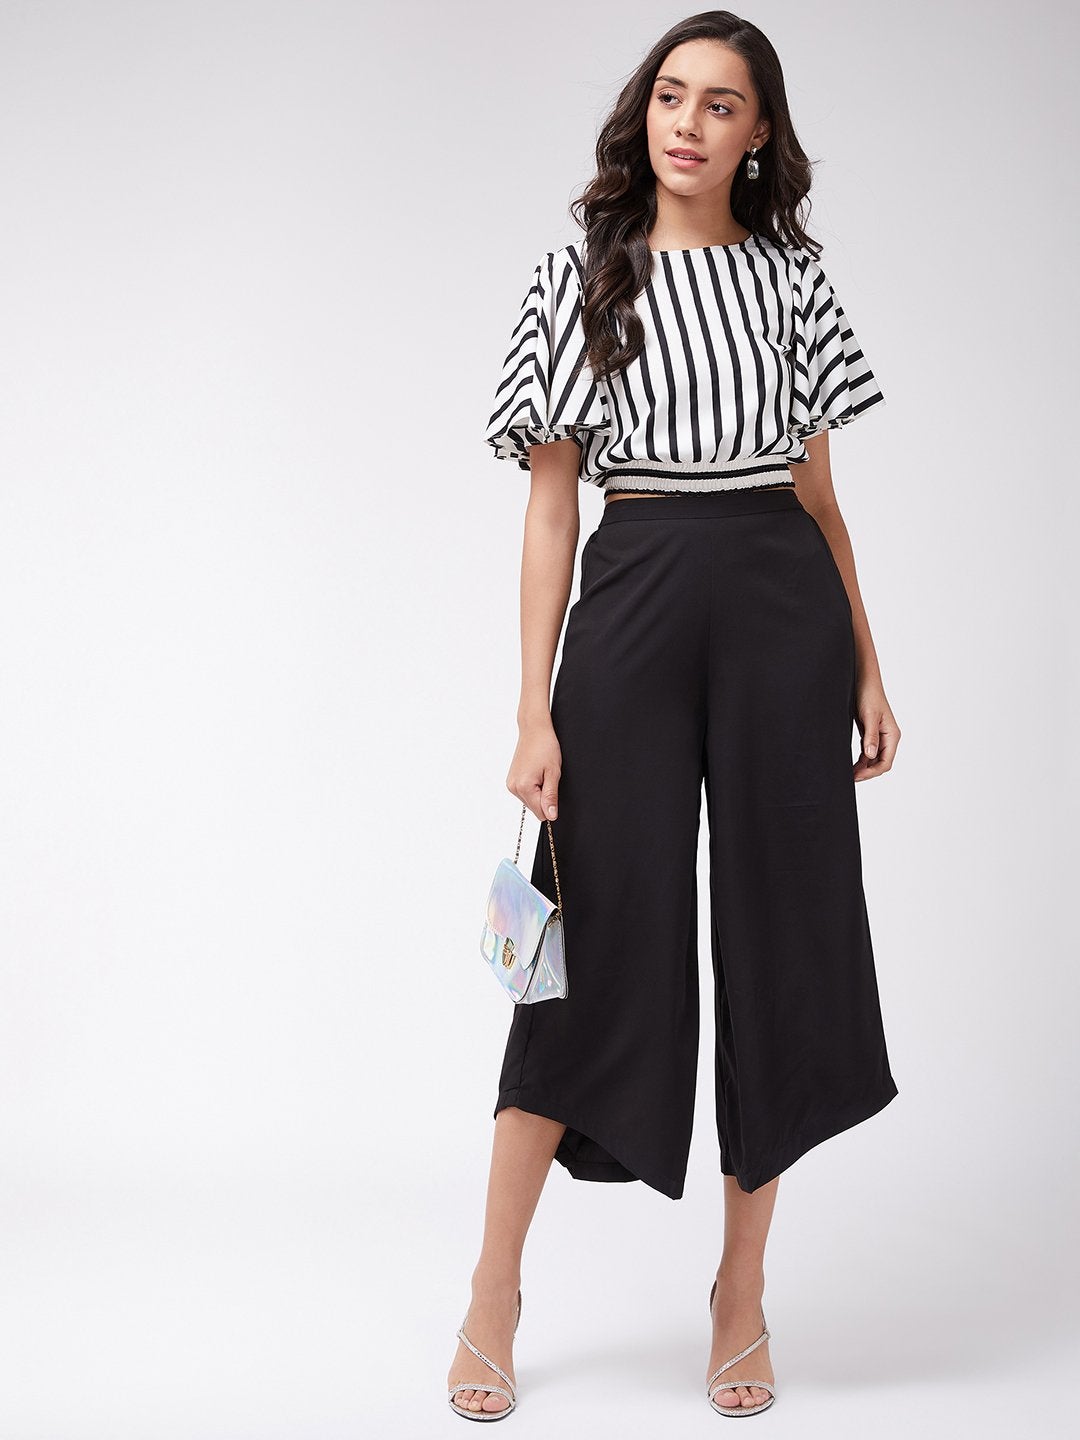 Women's Monocromatic Stripes Crop Top With Solid Pants - Pannkh